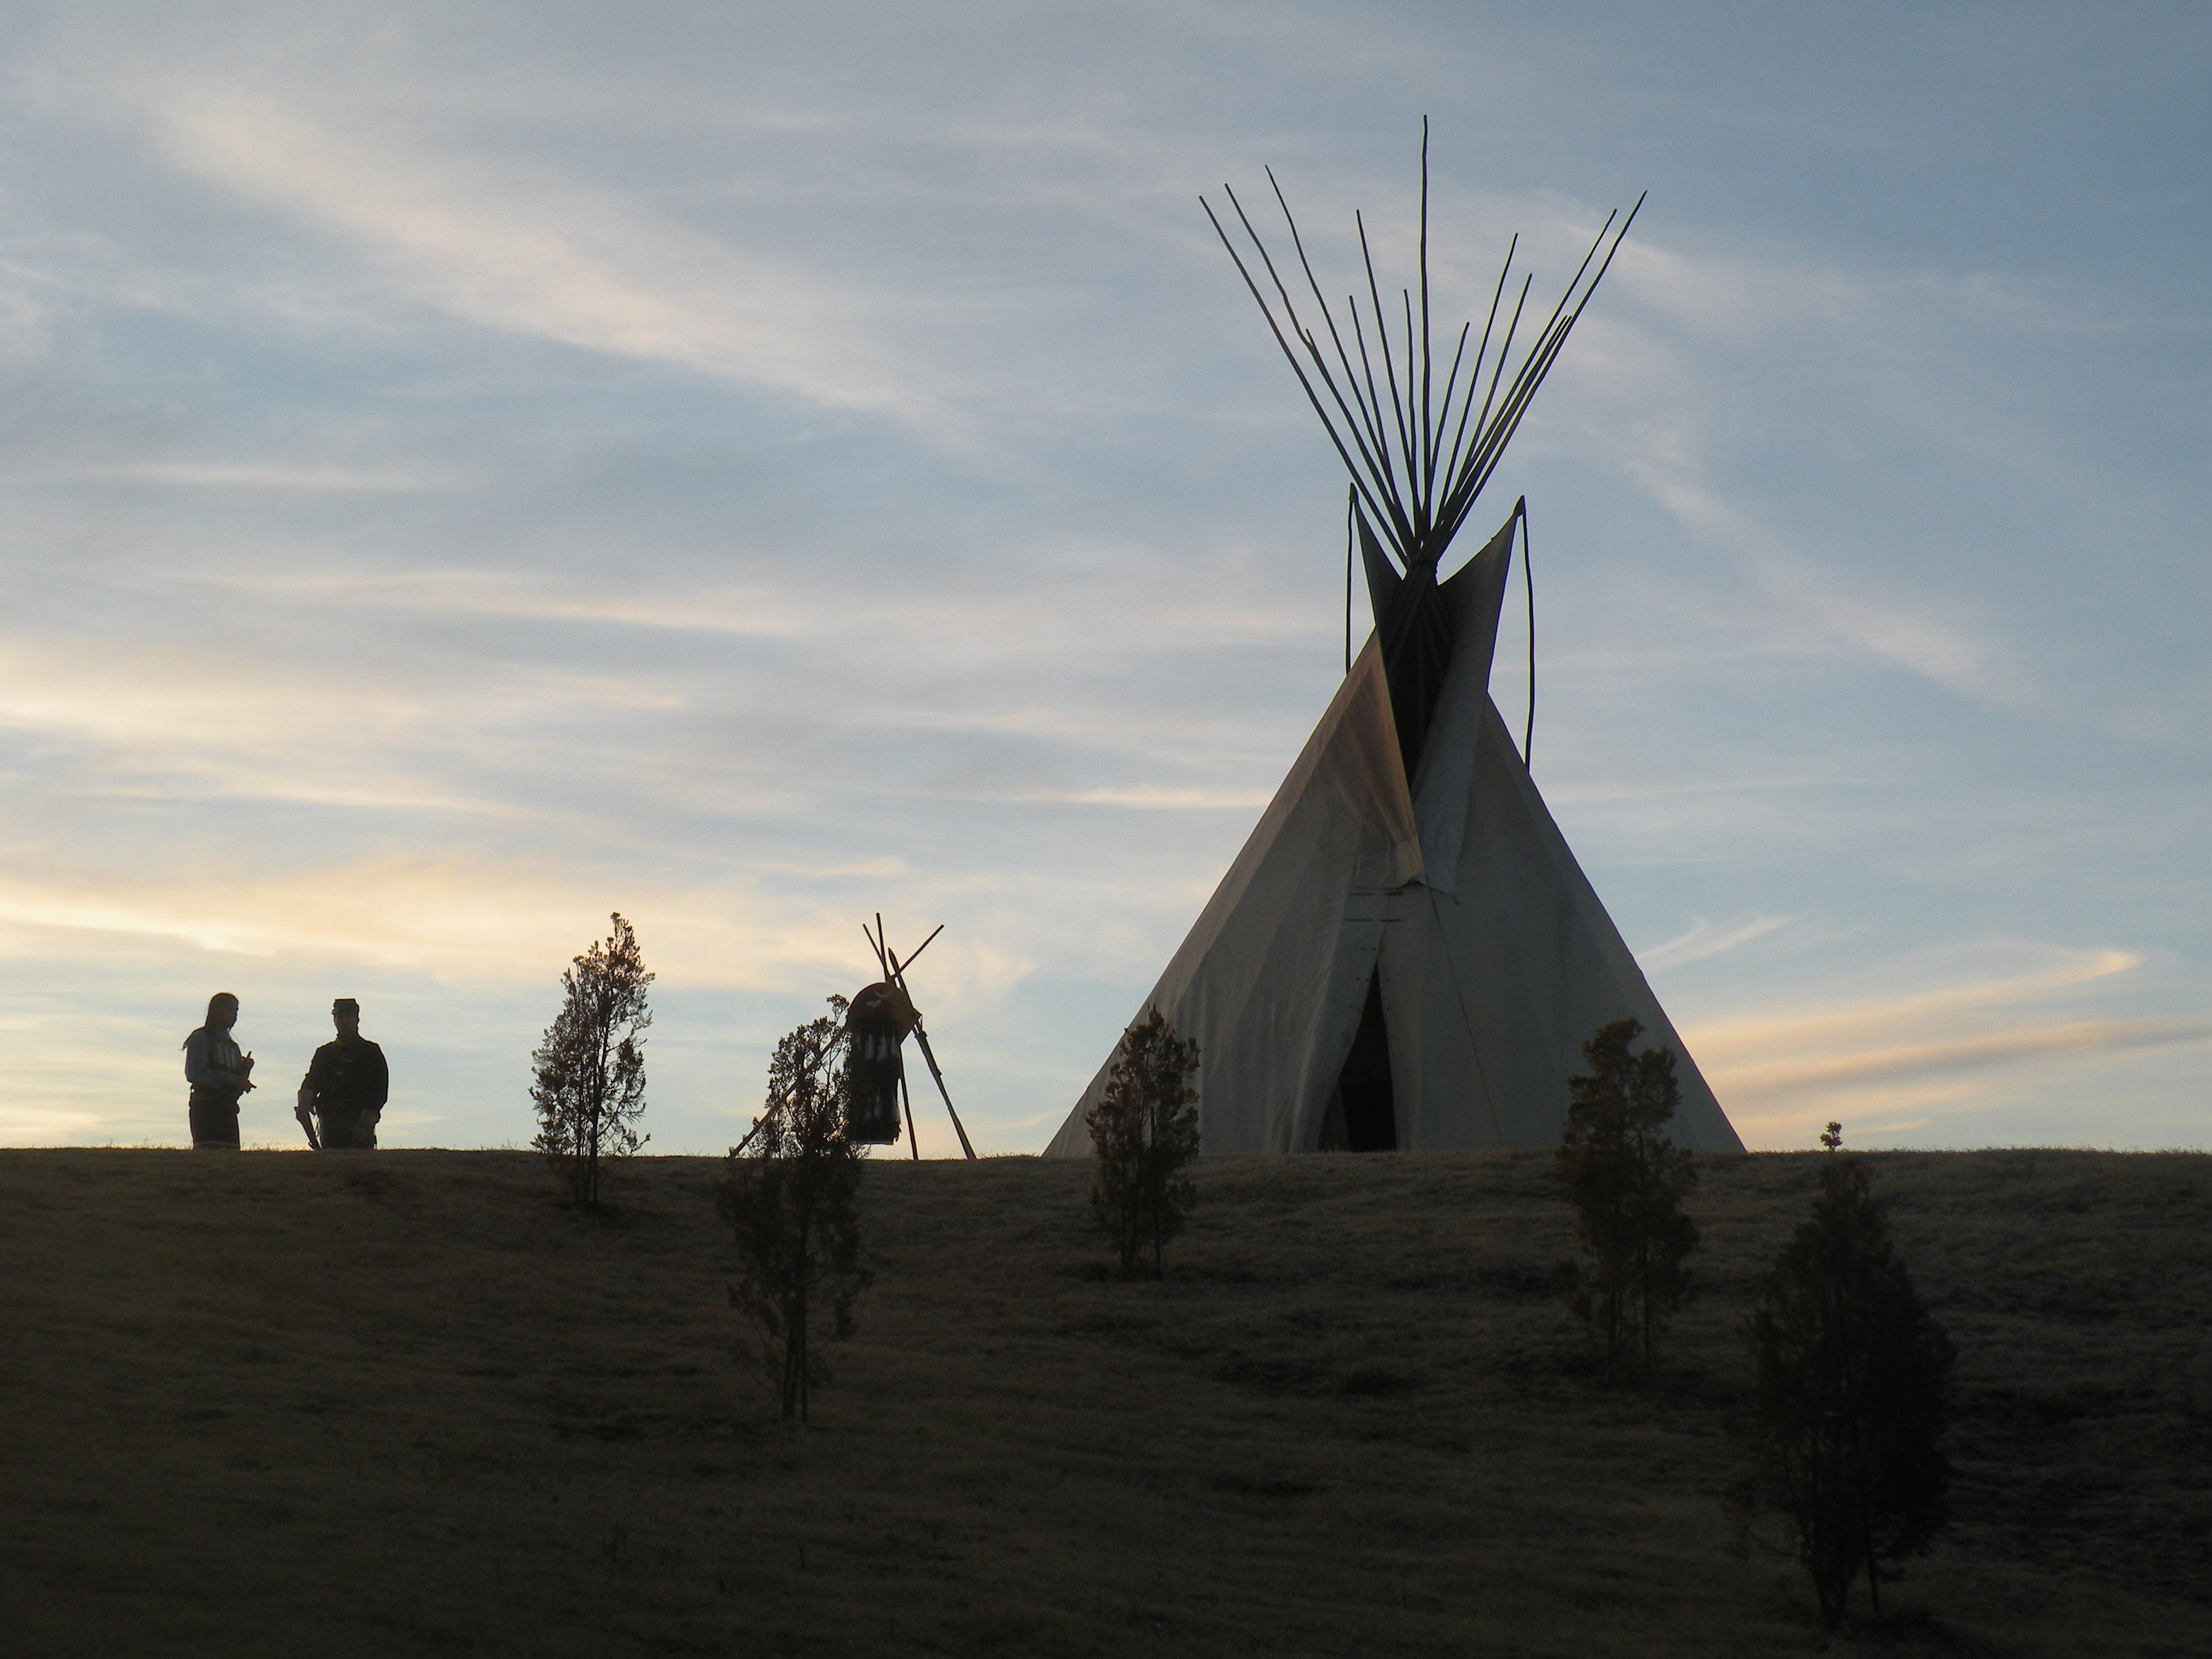 A Cheyenne Warrior and U.S. Cavalry soldier hold a meeting next to a tipi